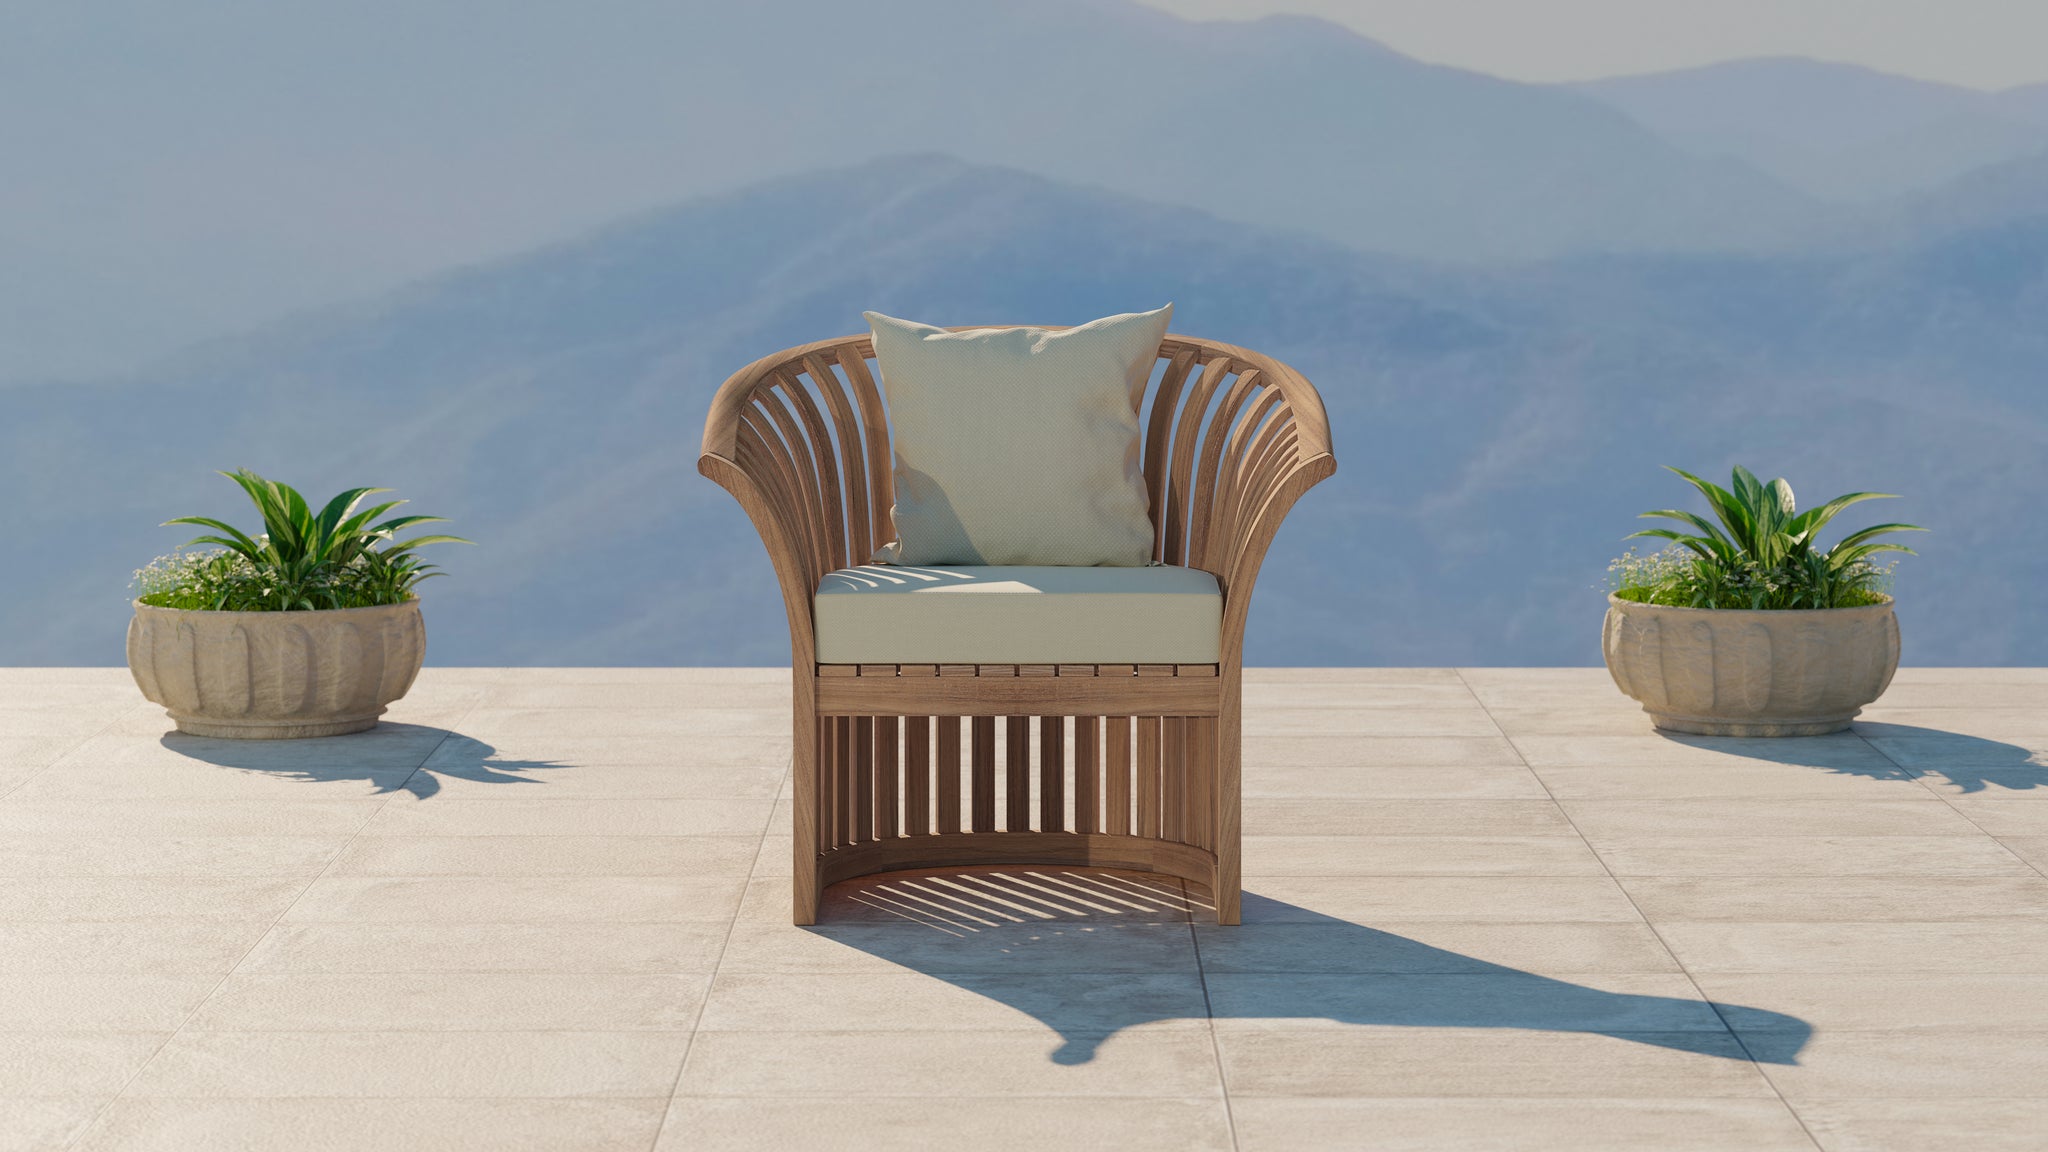 The Ascot Teak Outdoor Lounge Chair